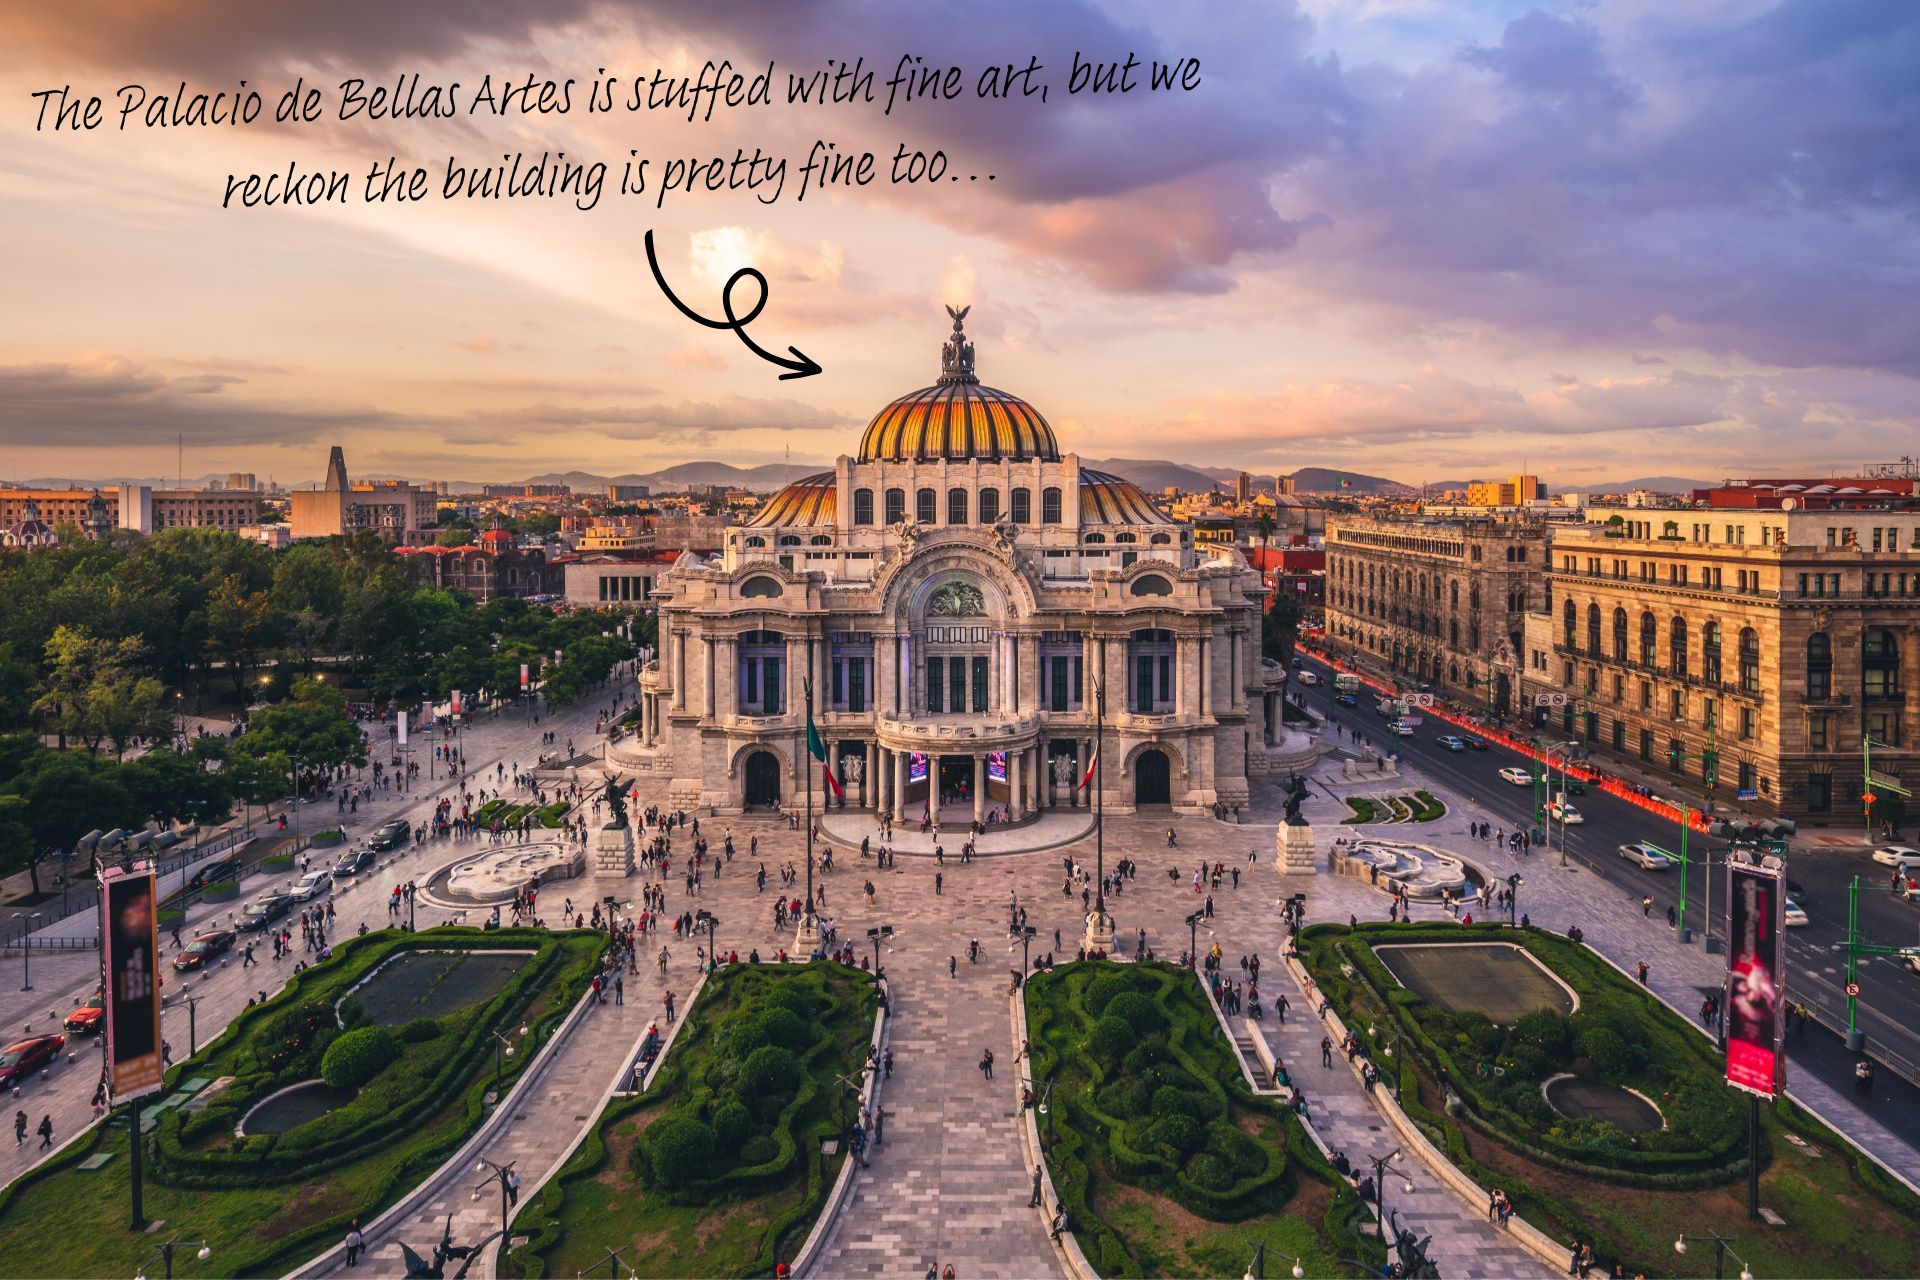 The Palacio de Bellas Artes in Mexico City at sunset - a building in the style of Art Nouveau, with a glass dome at the top, and surrounded by a square bustling with people.